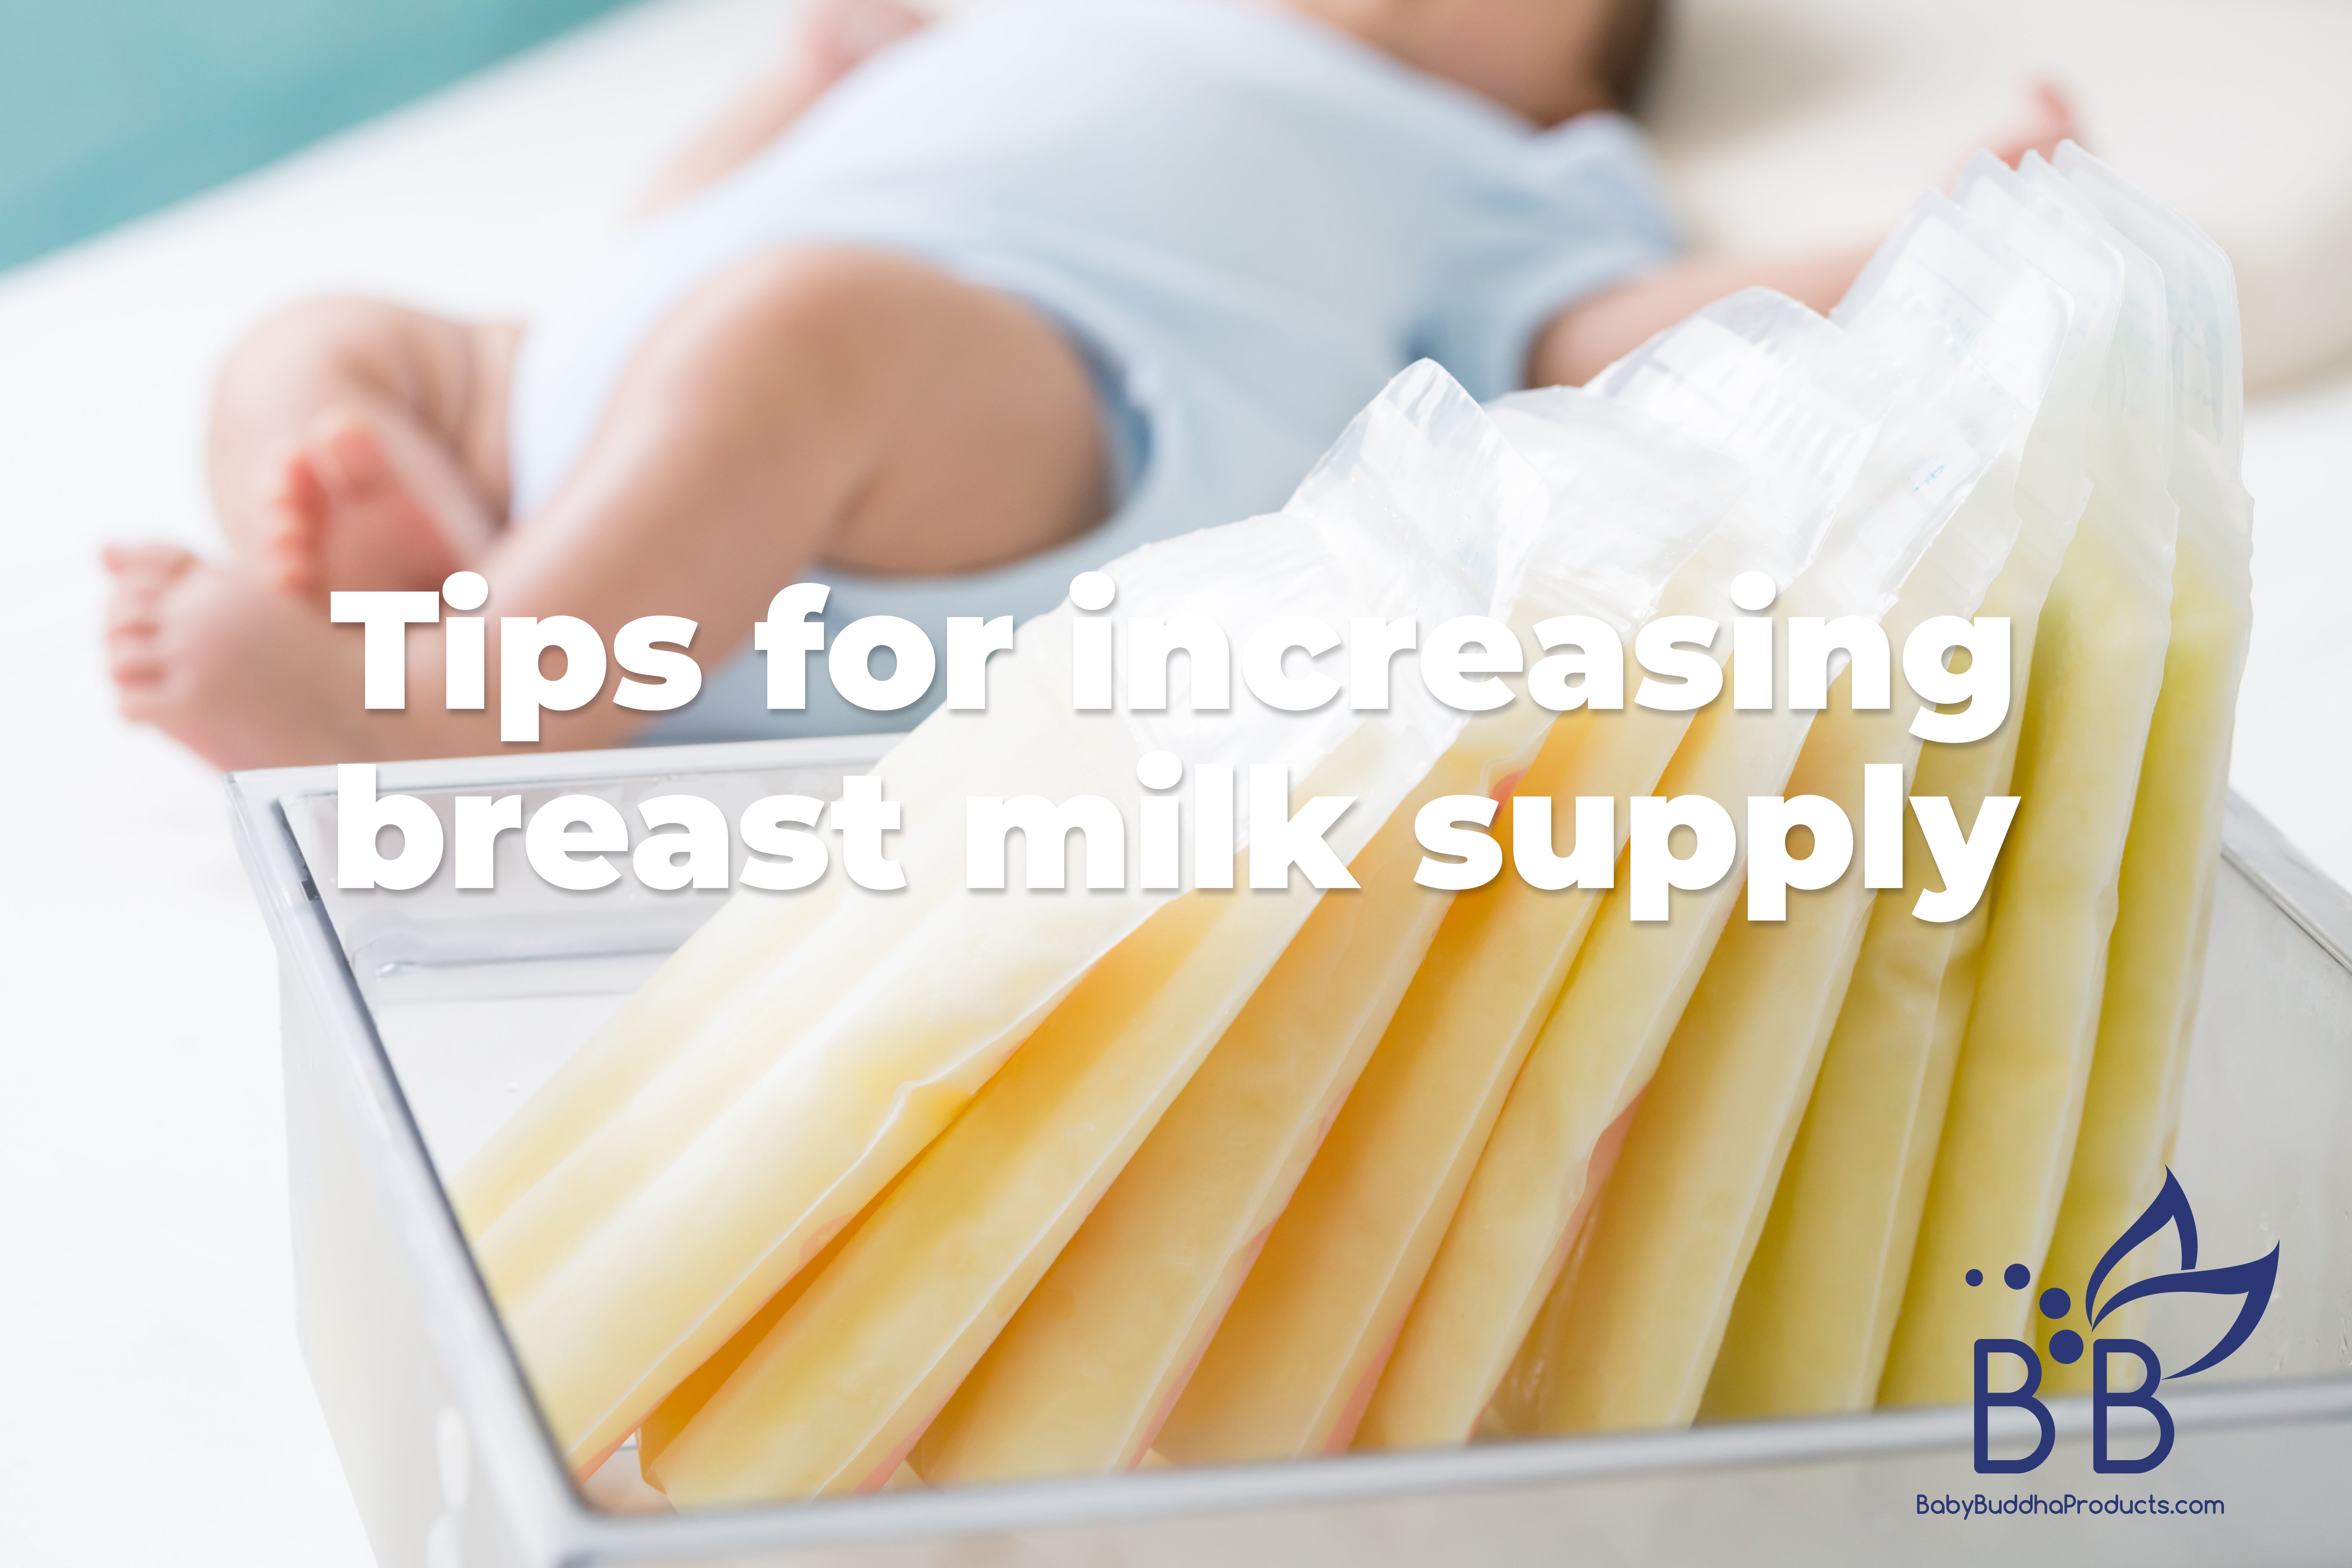 How To Fix Lopsided Milk Production From Breastfeeding  Breast milk,  Breastfeeding, Breastfeeding and pumping